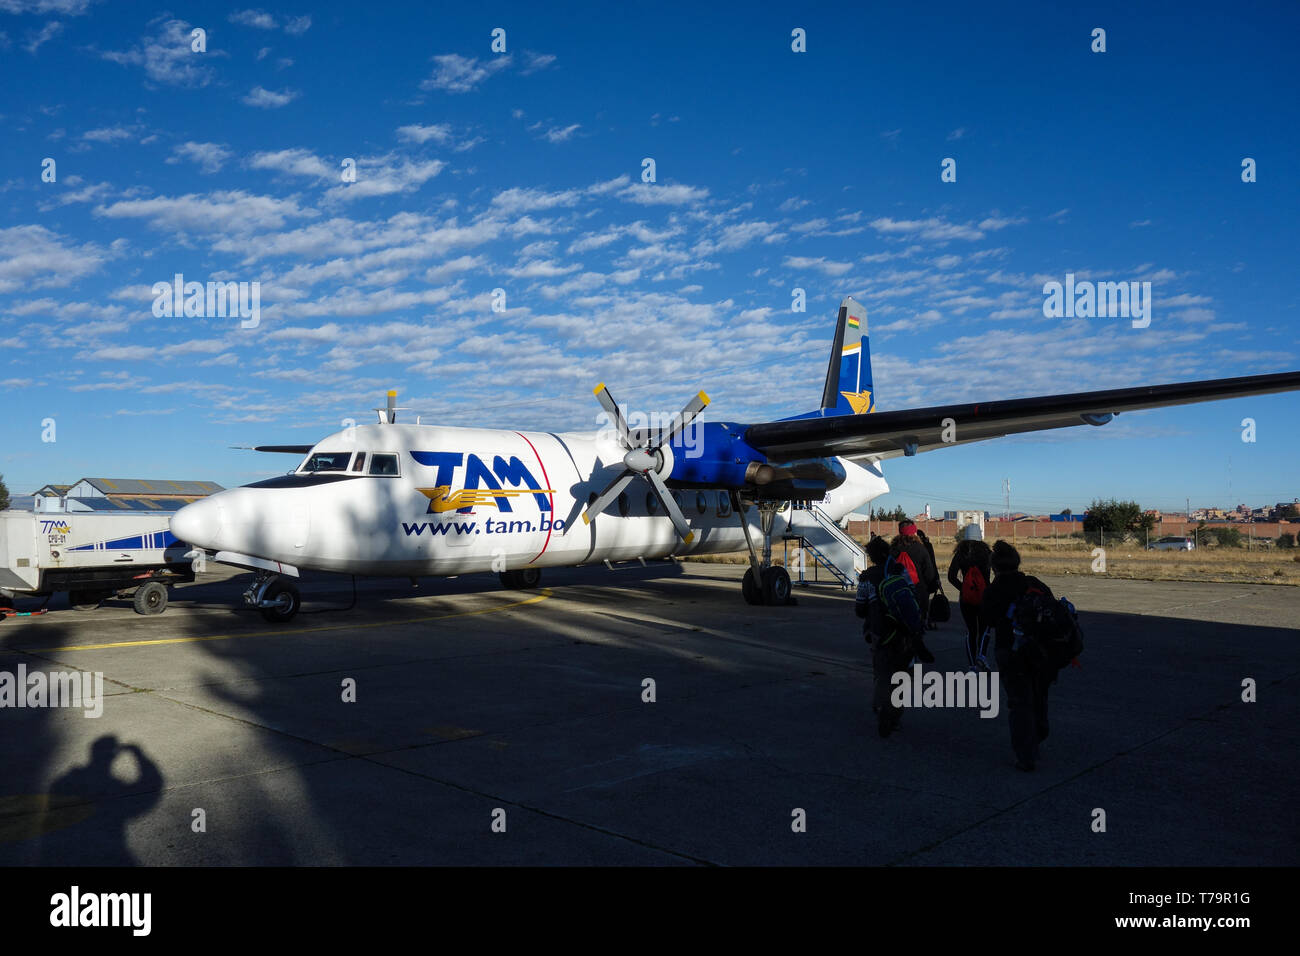 La Paz - military airport, Bolivia - May 31, 2017: An old TAM propeller airplane, boarding backpacker before departure to Rurrenabaque, Bolivia Stock Photo